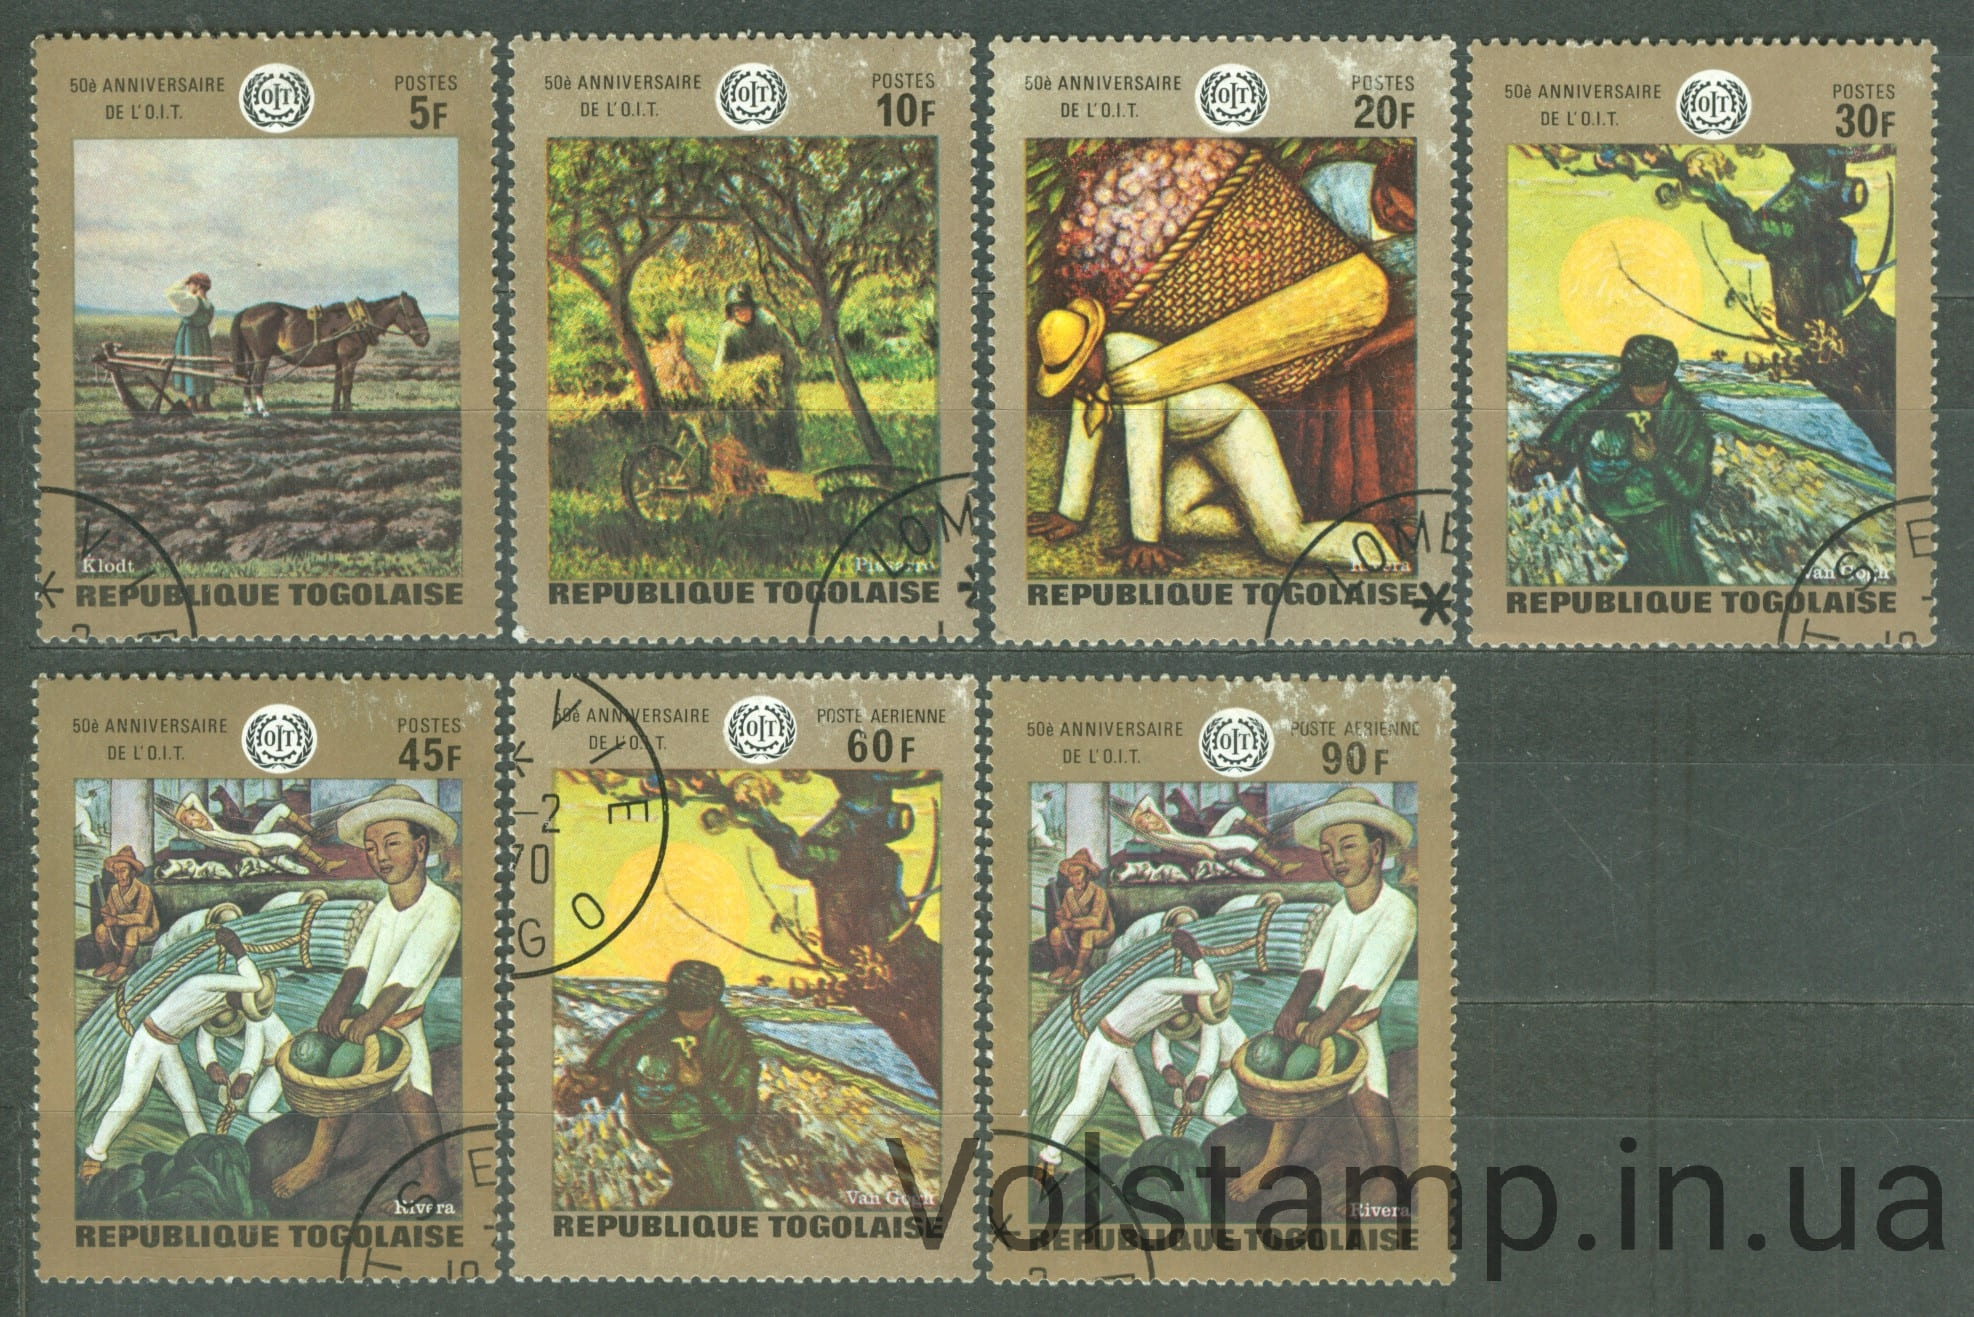 1970 Togo Series of stamps (Paintings 1970 ILO 50th Anniversary) Used №771-777